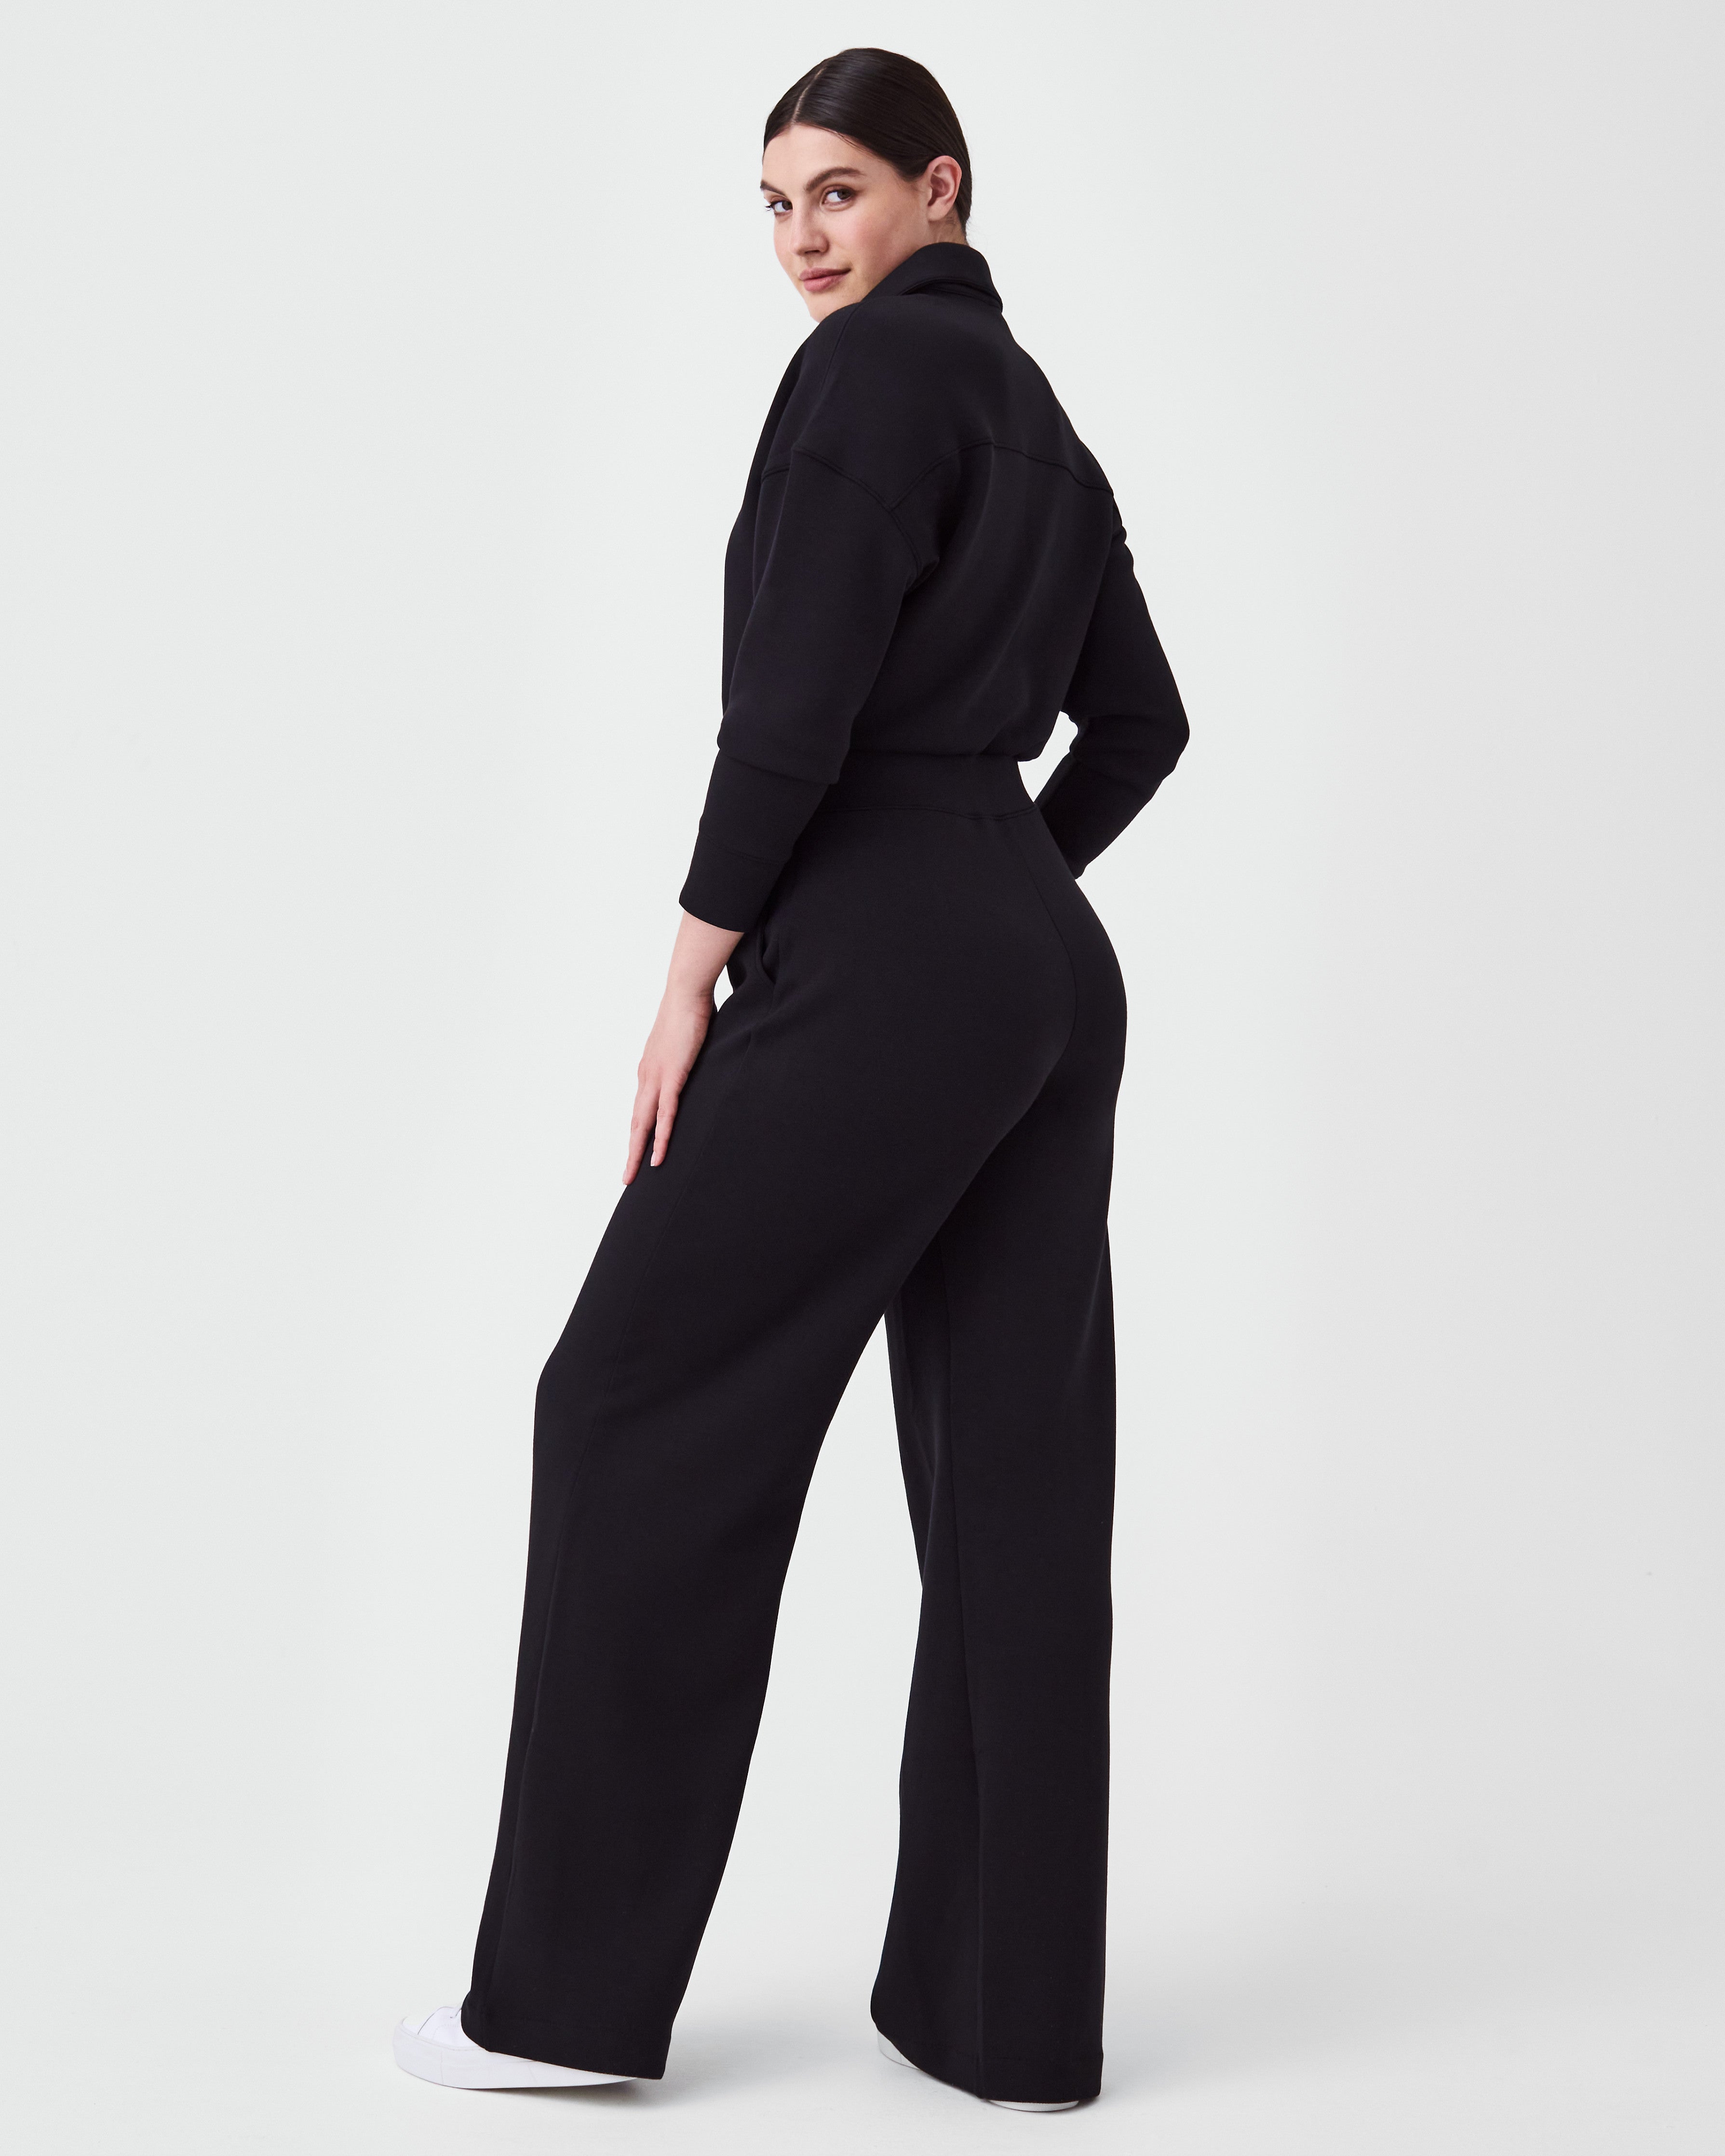 Did you know @spanx makes apparel? And active? And ponte pants